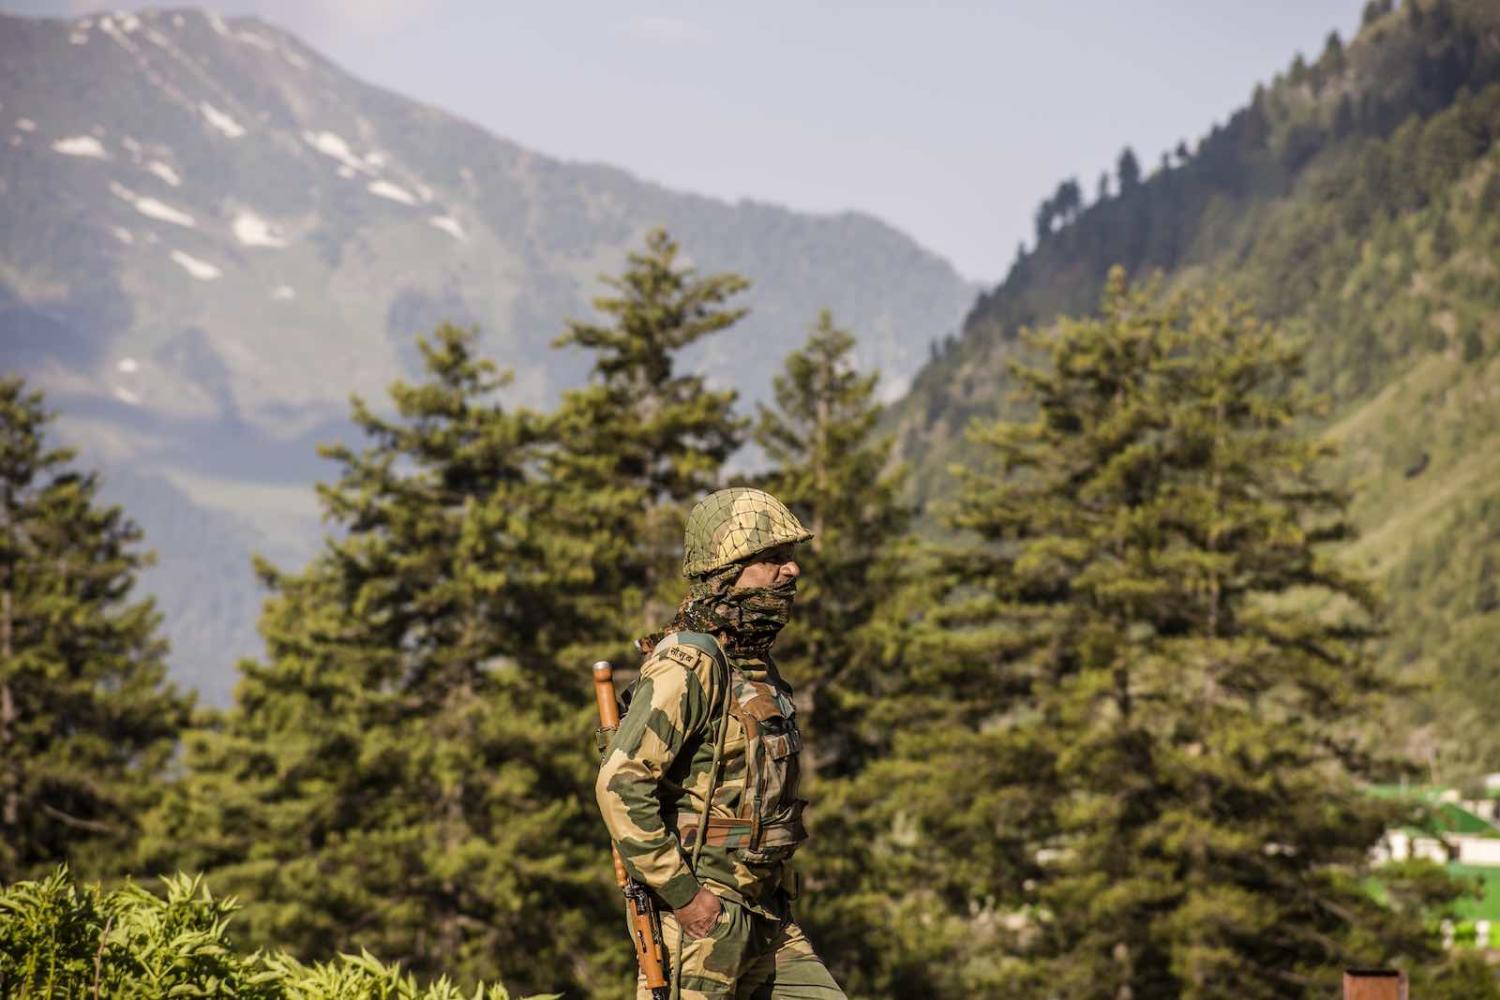 An Indian Border Security Force soldier guards a highway as Indian army convoy travels towards Leh, bordering China, on 19 June in Gagangir, India (Yawar Nazir/Getty Images)